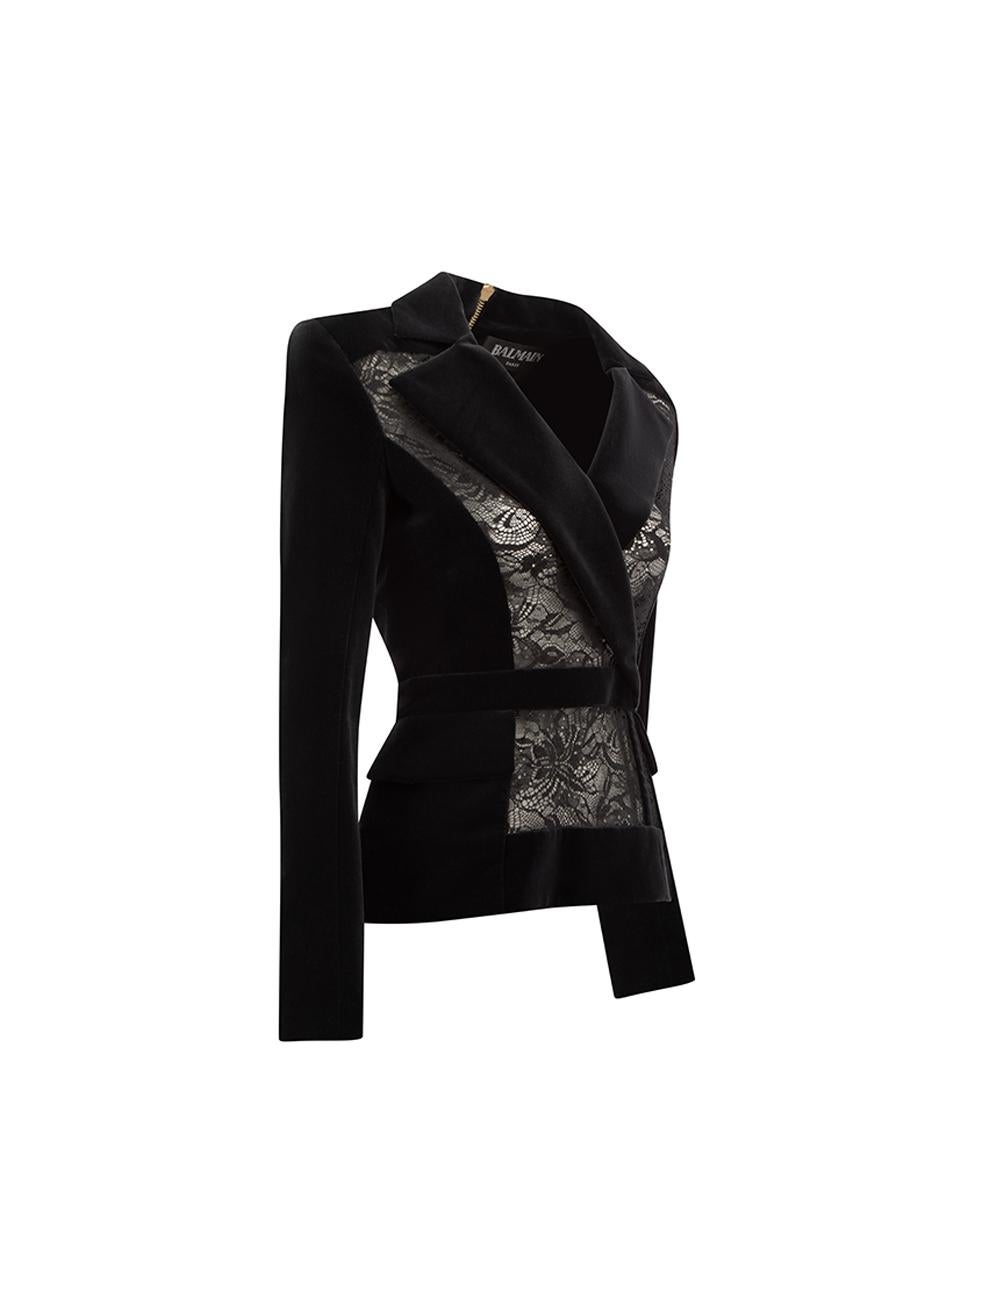 CONDITION is Very good. Hardly any visible wear to top is evident on this used Balmain designer resale item.   Details  Black Velvet Blazer like top V neckline Long sleeves with snap buttoned cuffs Lace panel Back zip closure Front side pockets with